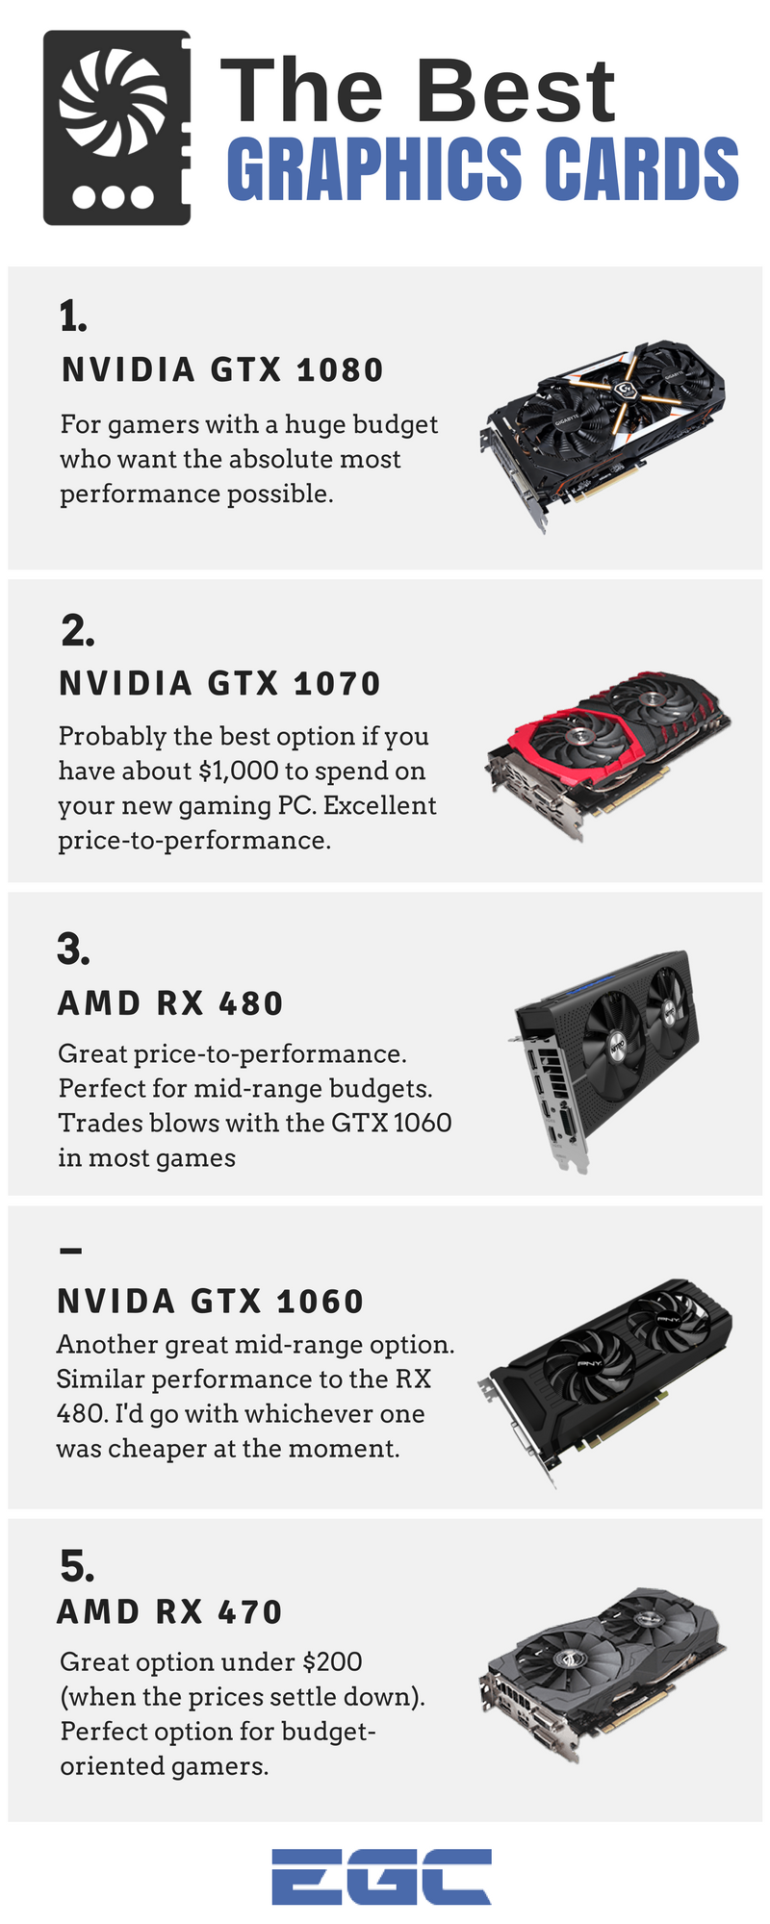 The Best Graphics Cards for 2016